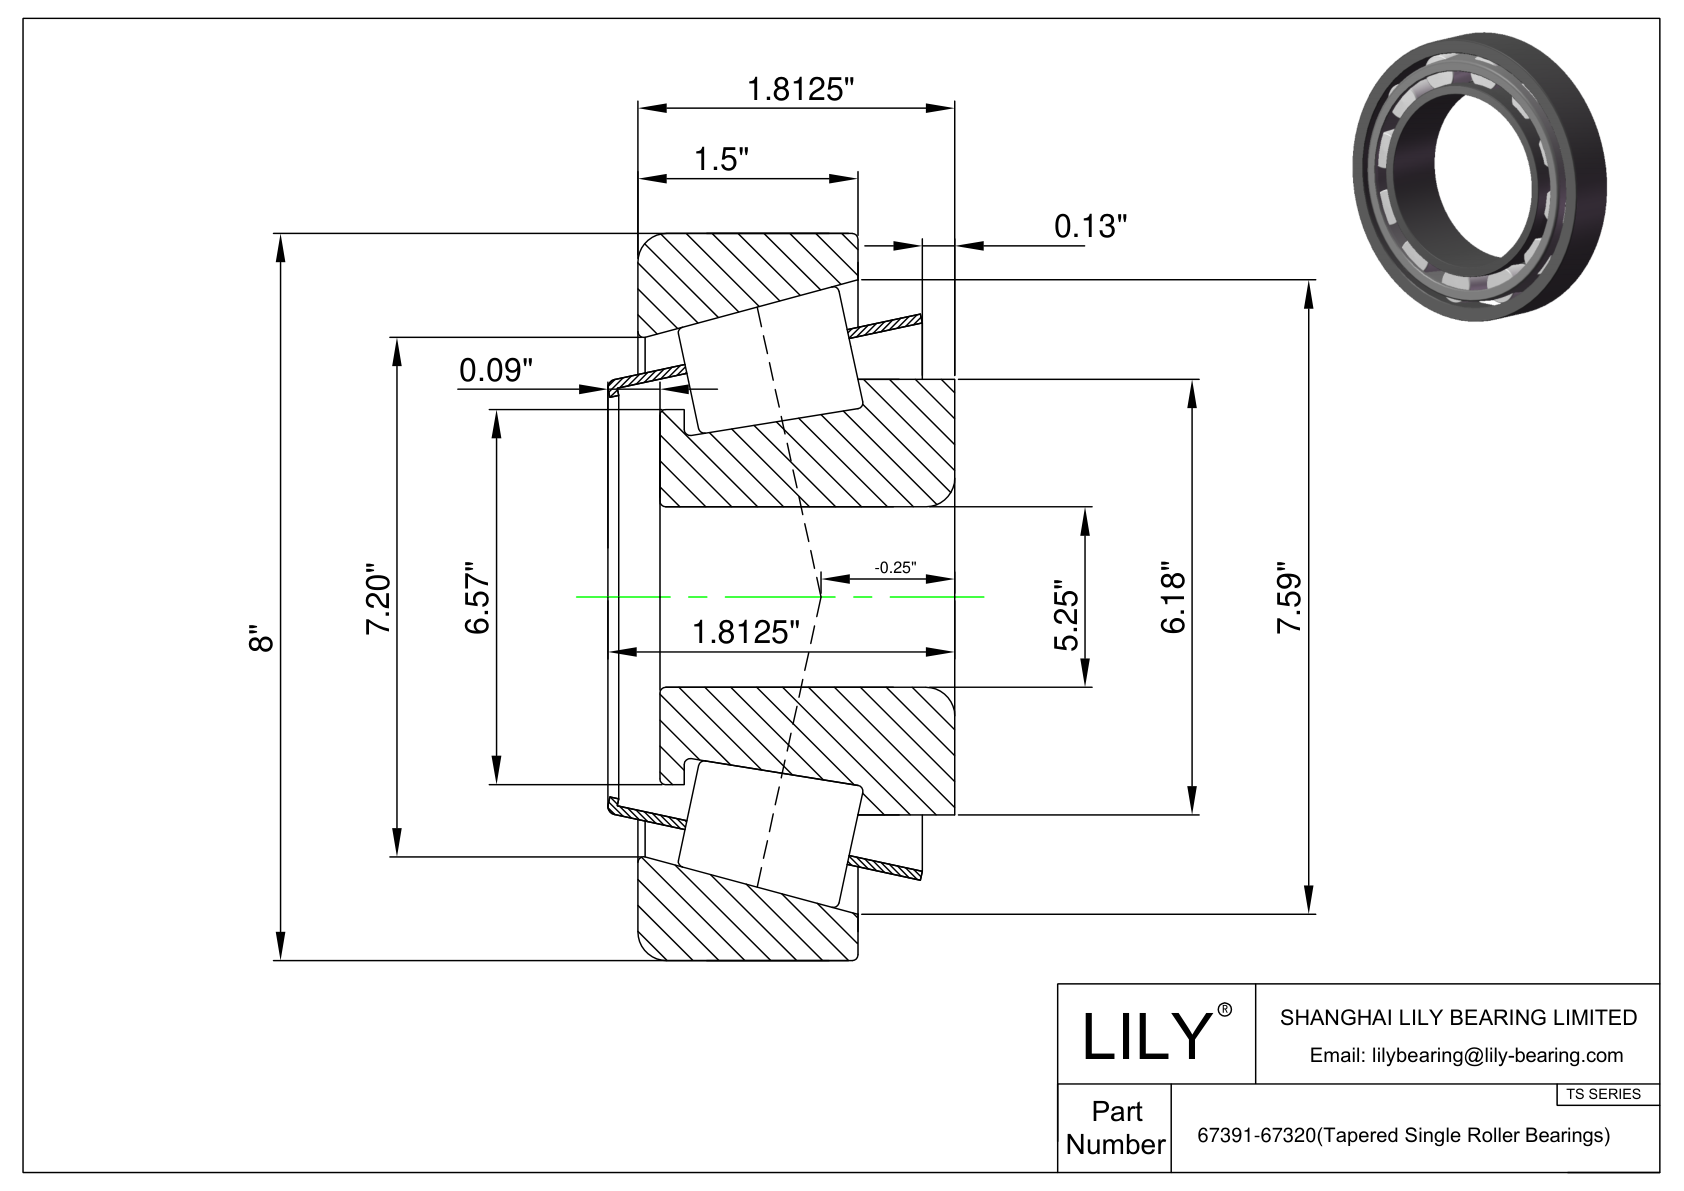 67391-67320 TS (Tapered Single Roller Bearings) (Imperial) cad drawing